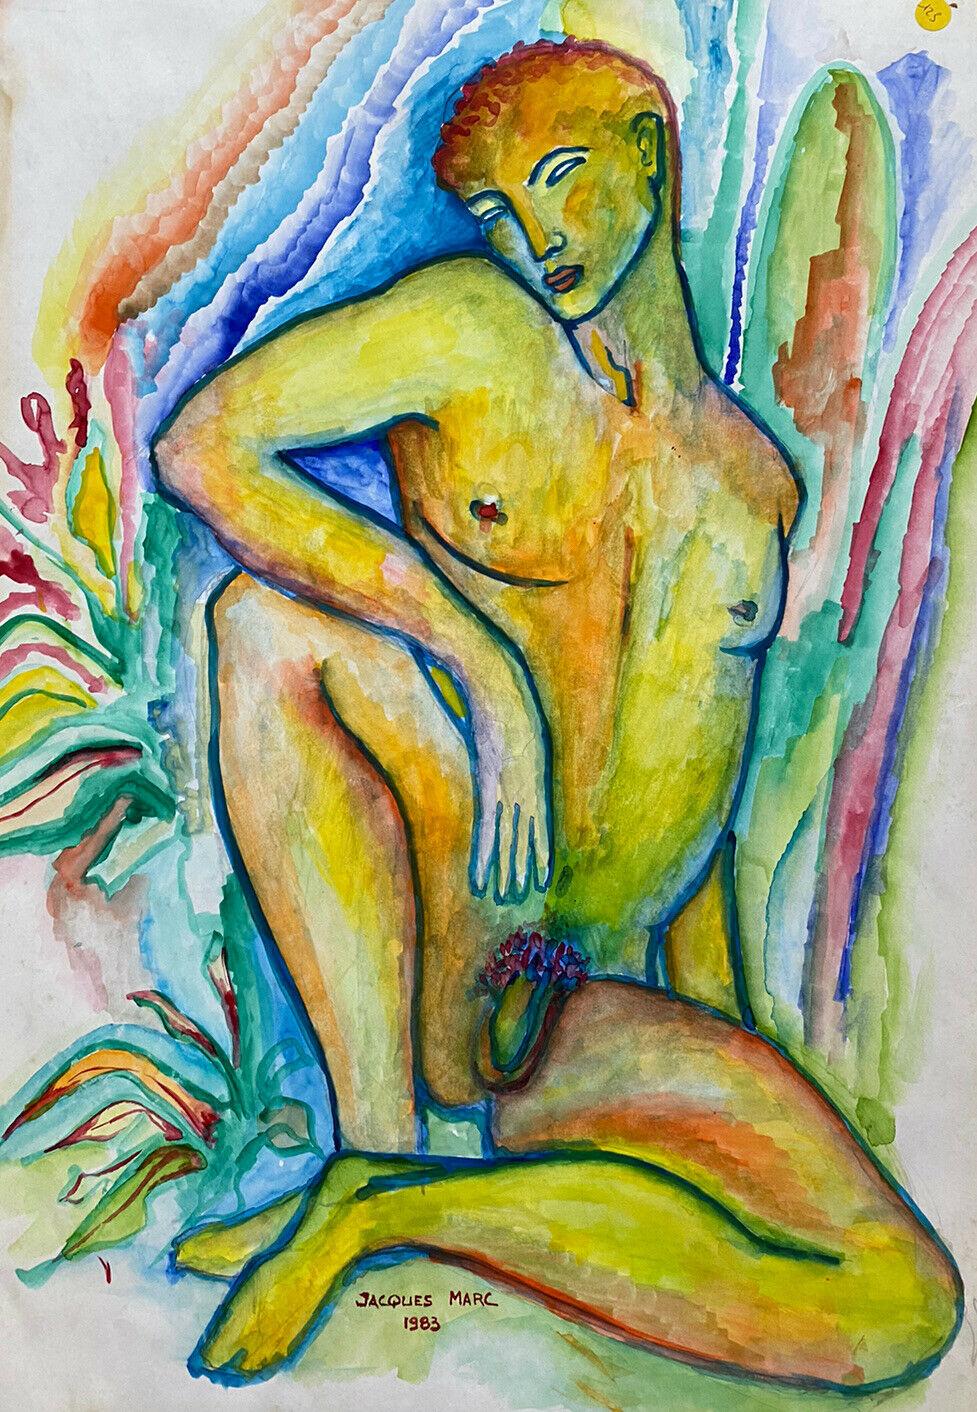 Jean Marc Nude Painting – COLORFUL 20. Jahrhundert LARGE FRENCH MODERNIST PAINTING - STANDING MALE NUDE